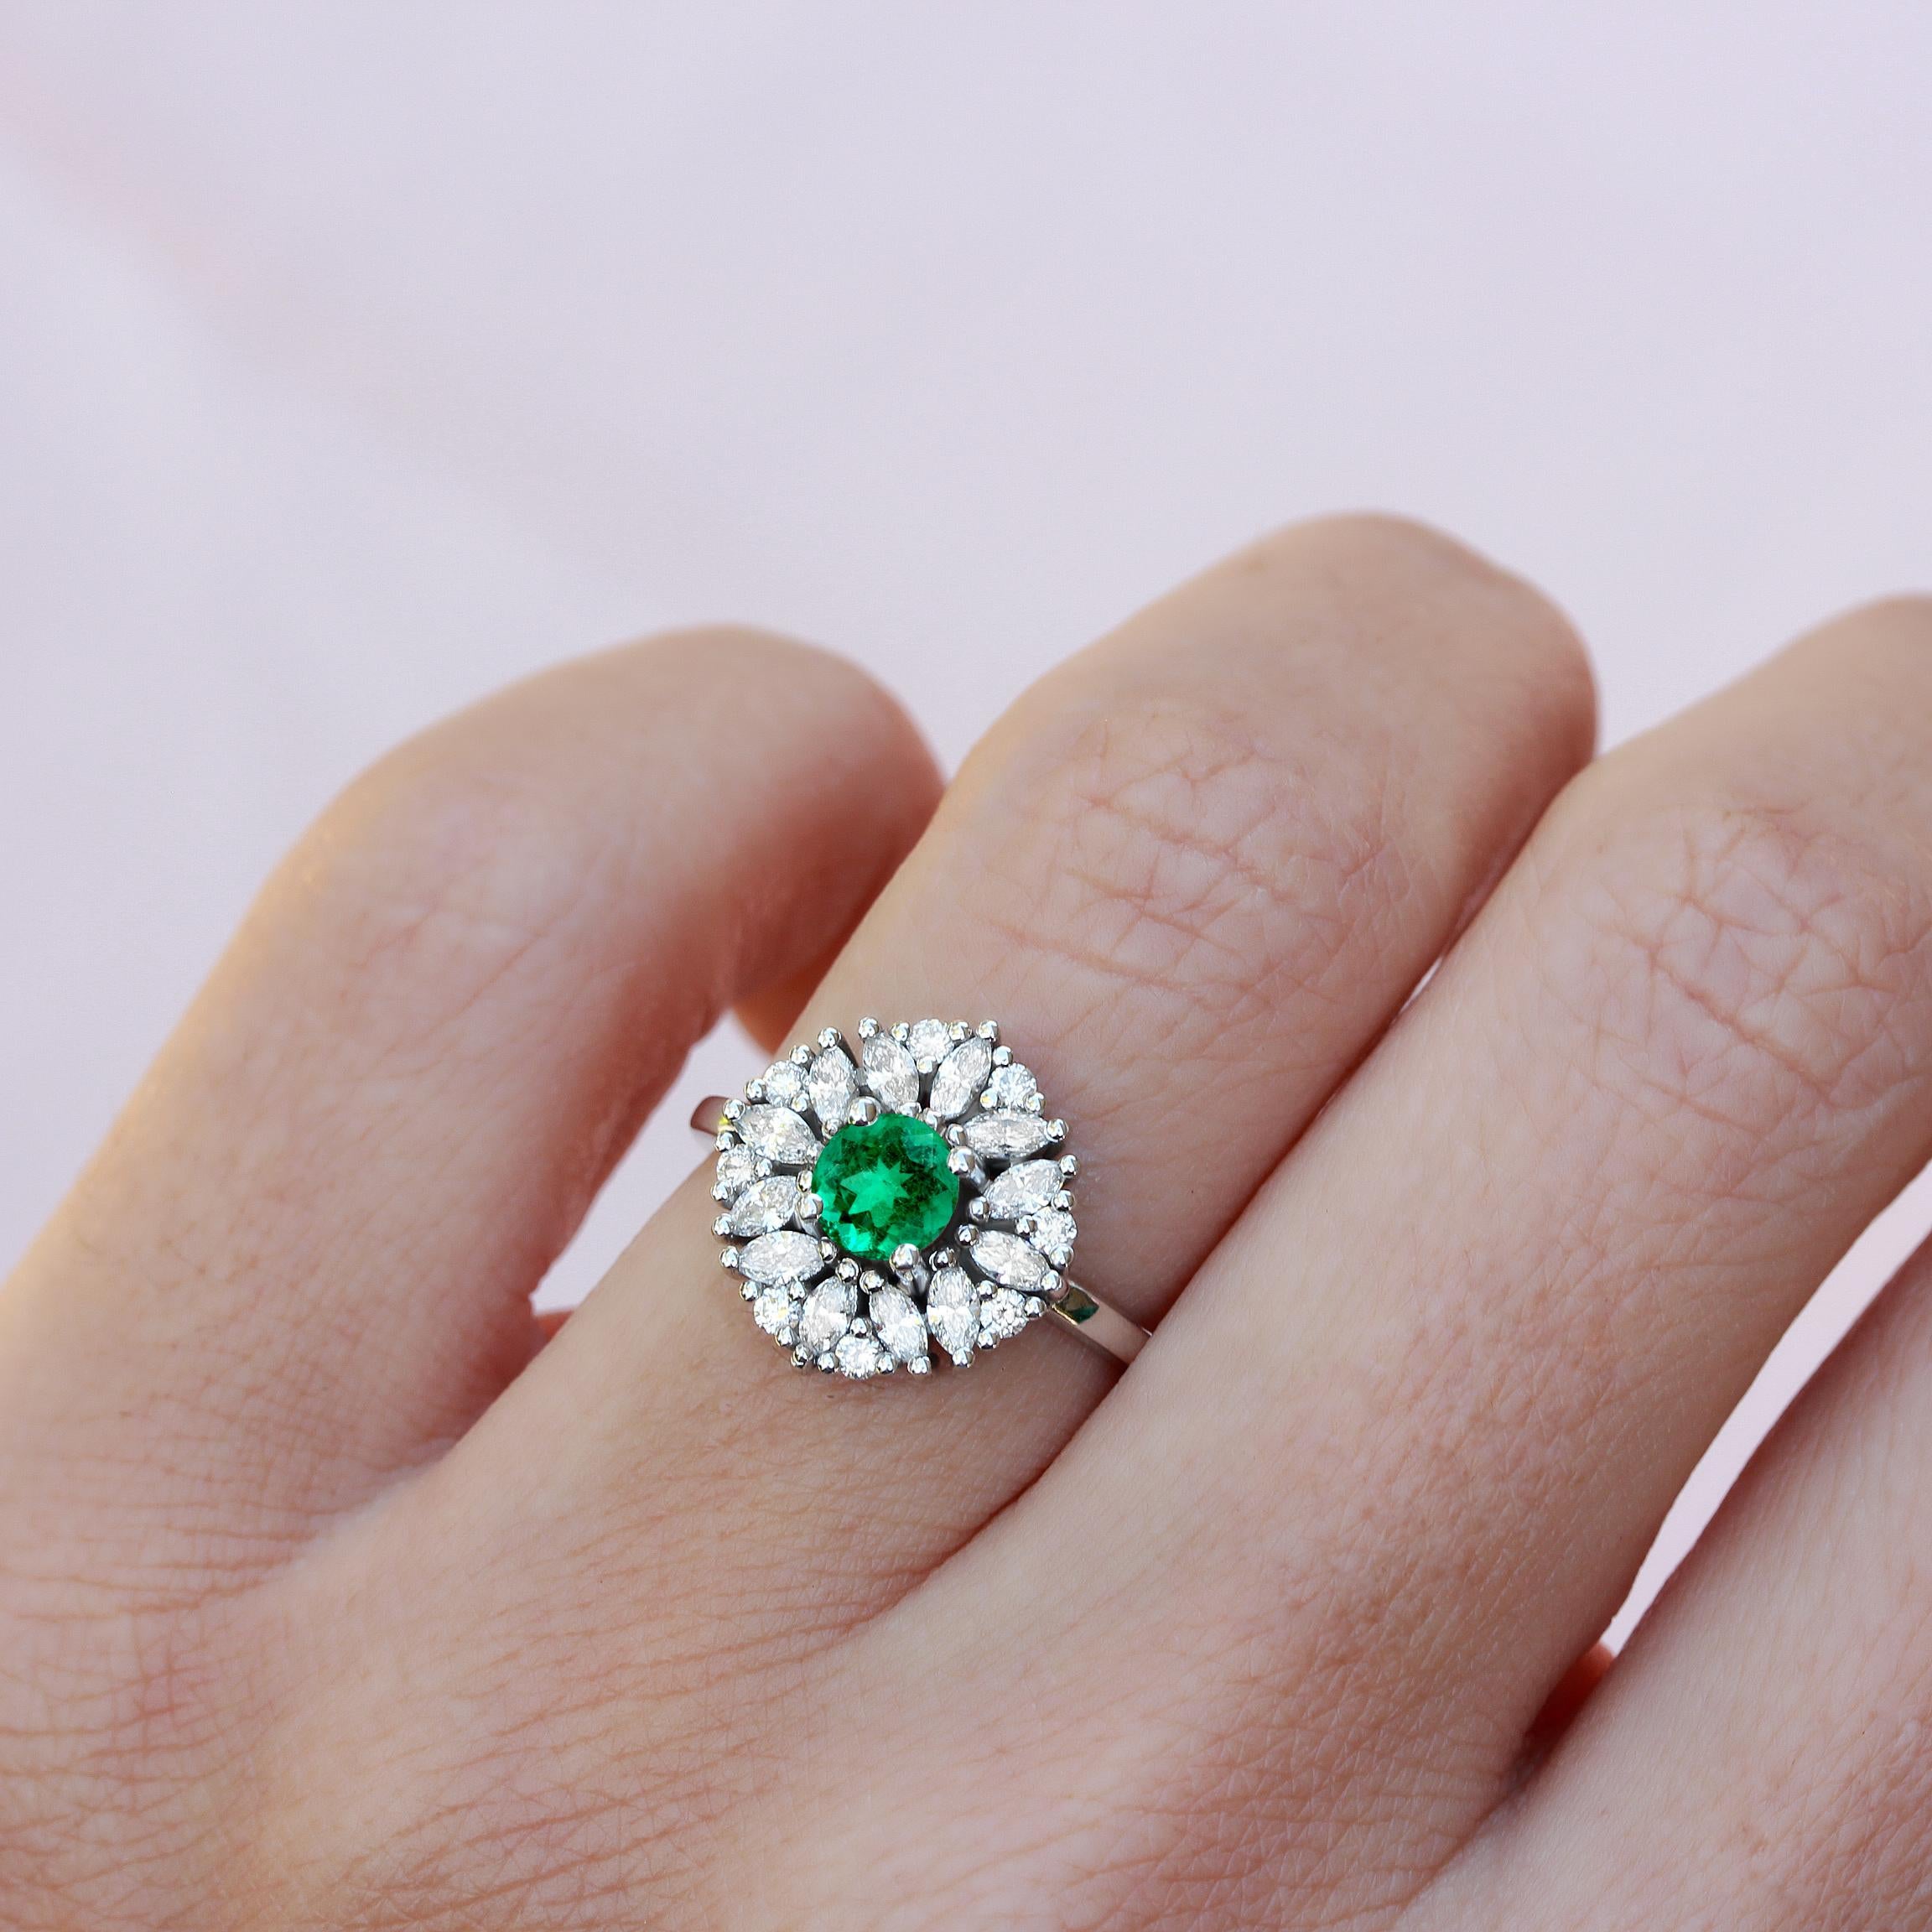 Delicate round green Emerald ring with marquise & round side diamonds - Harper.
Playing with marquise and round diamonds has made the perfect ring - the result is gorgeous!
This list is for the engagement ring only.
Handmade with care.
An original